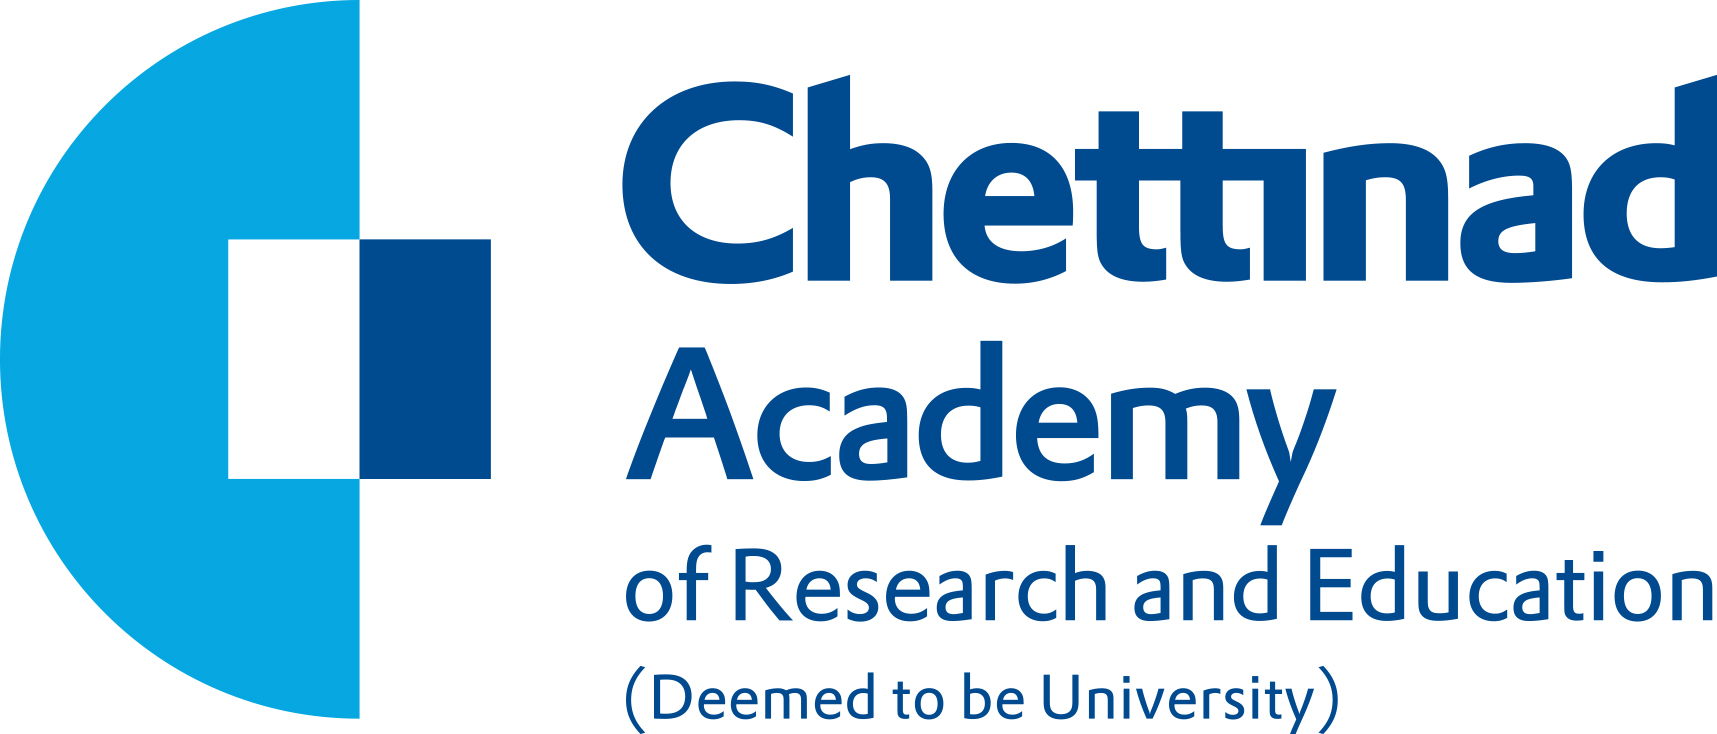 CHETTINAD ACADEMY OF RESEARCH AND EDUCATION